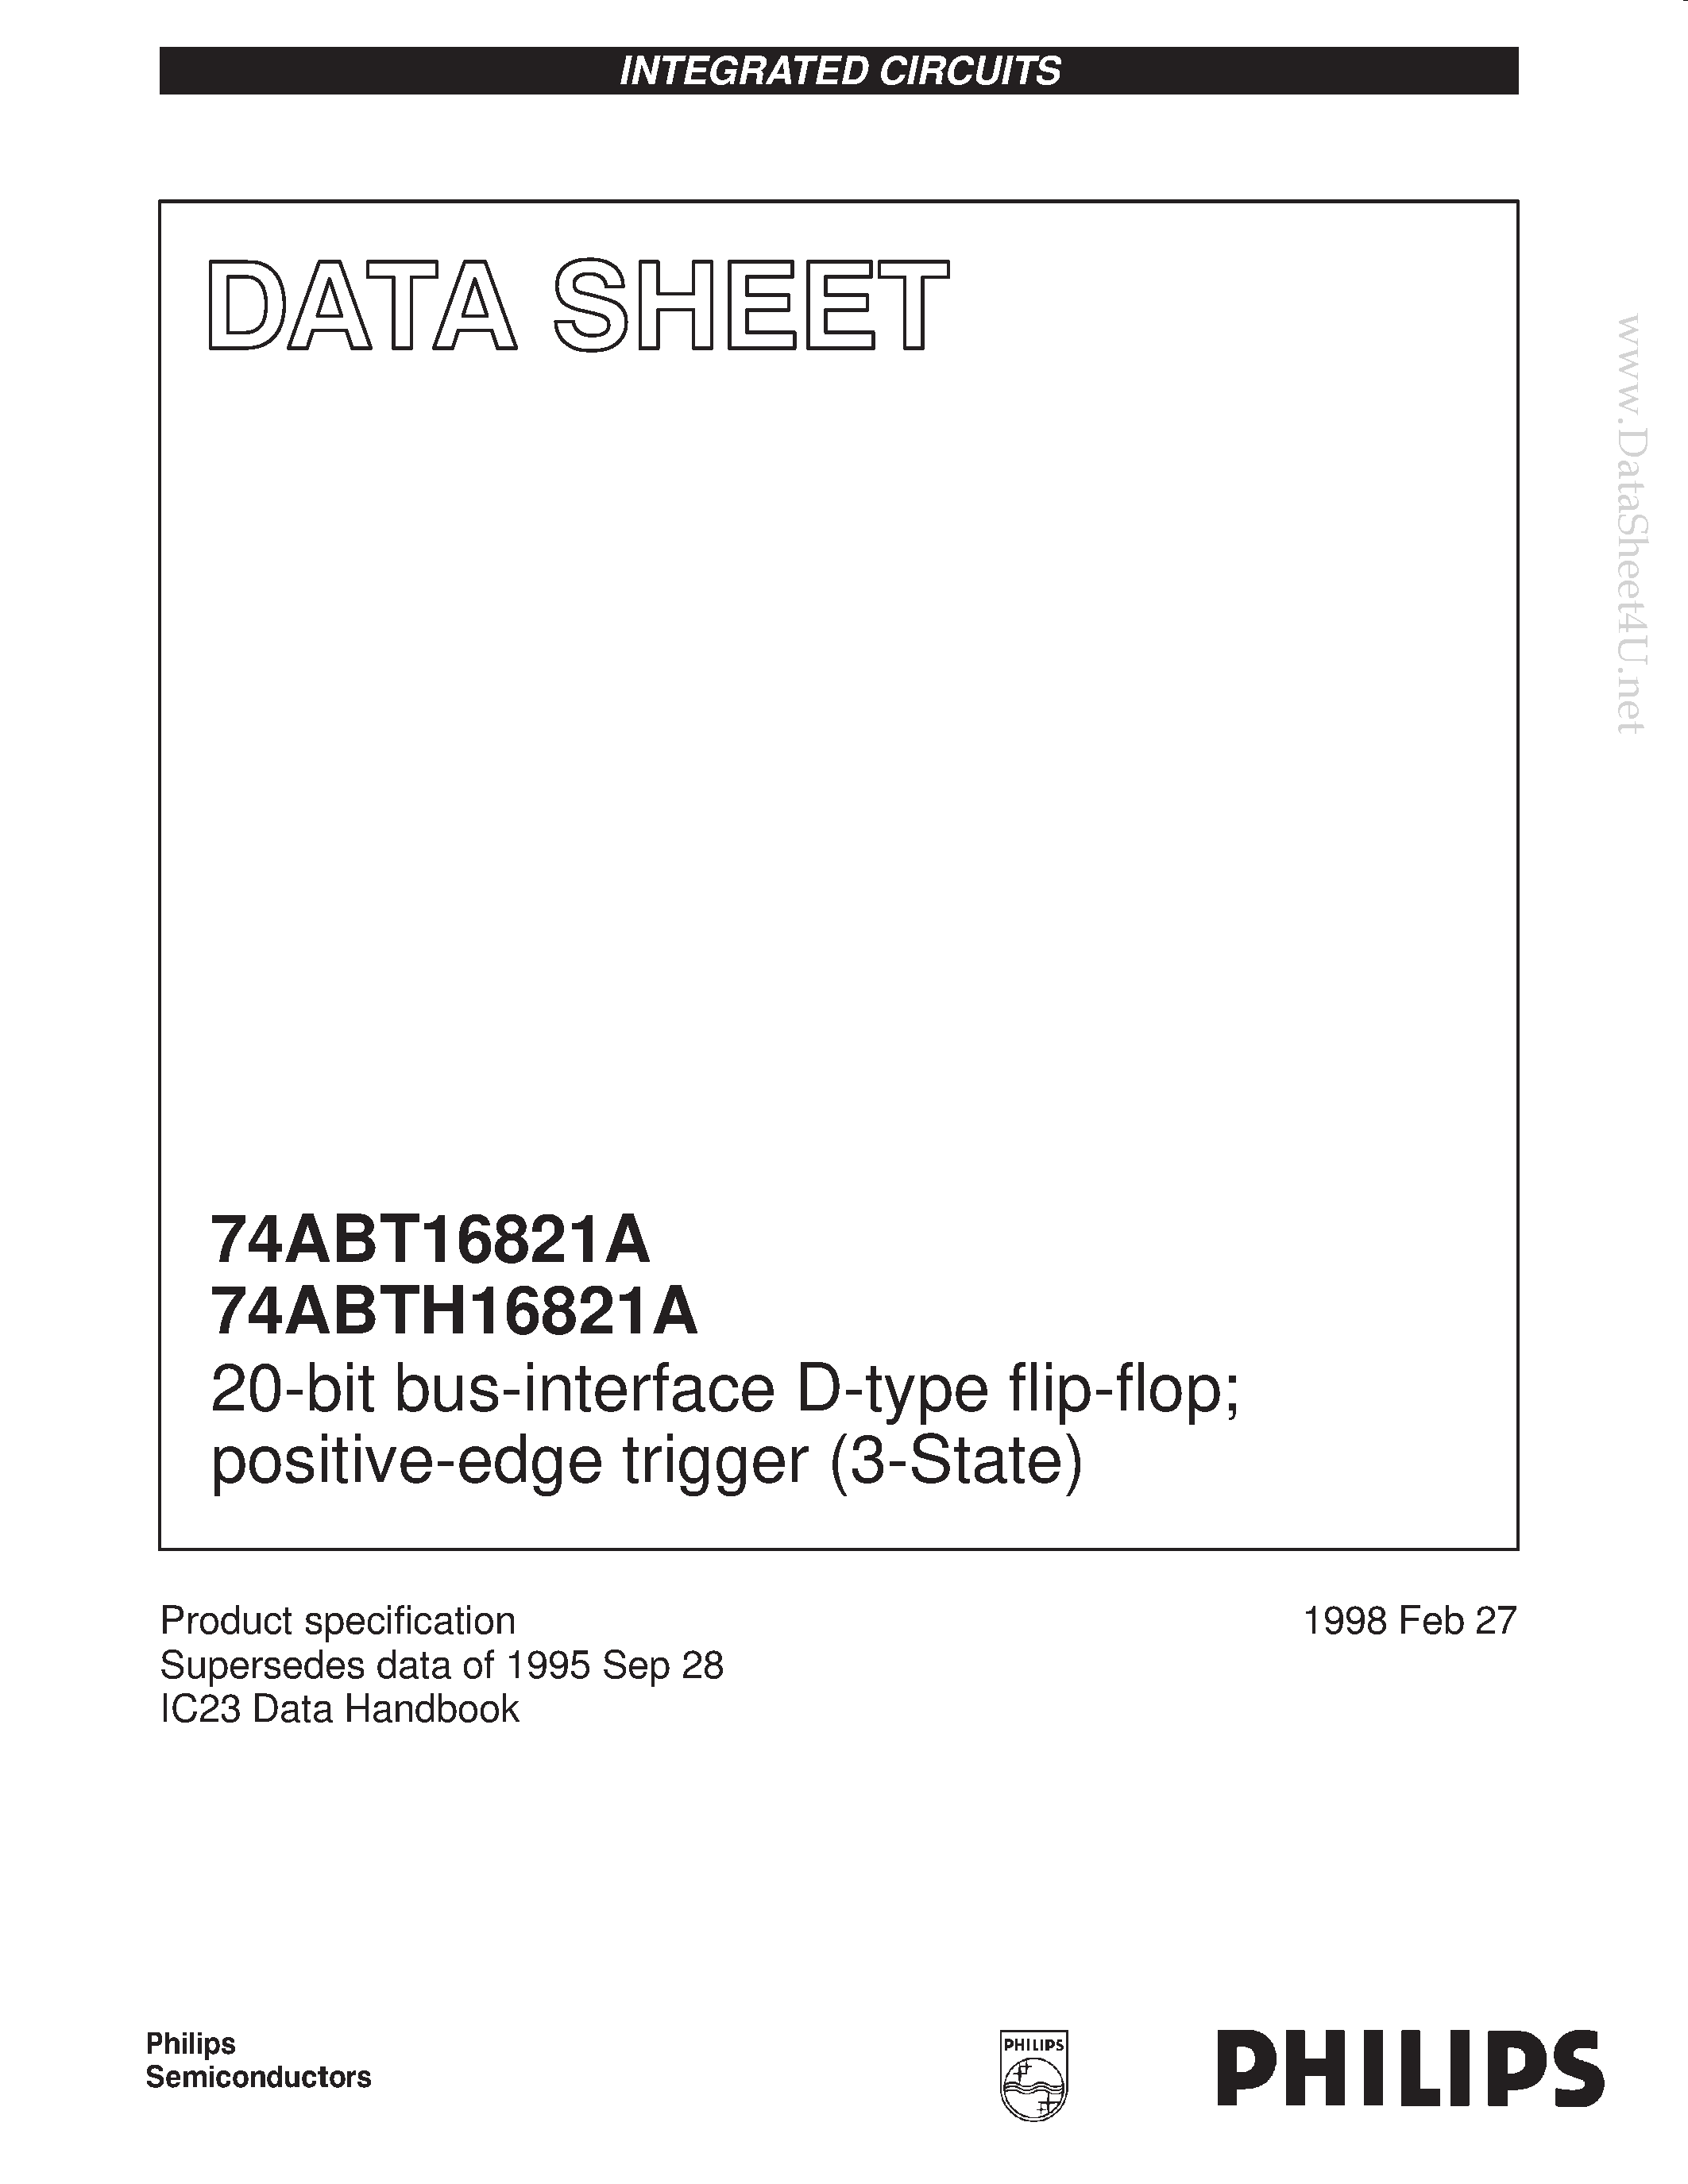 Datasheet 74ABTH16821ADL - 20-bit bus-interface D-type flip-flop; positive-edge trigger 3-State page 1